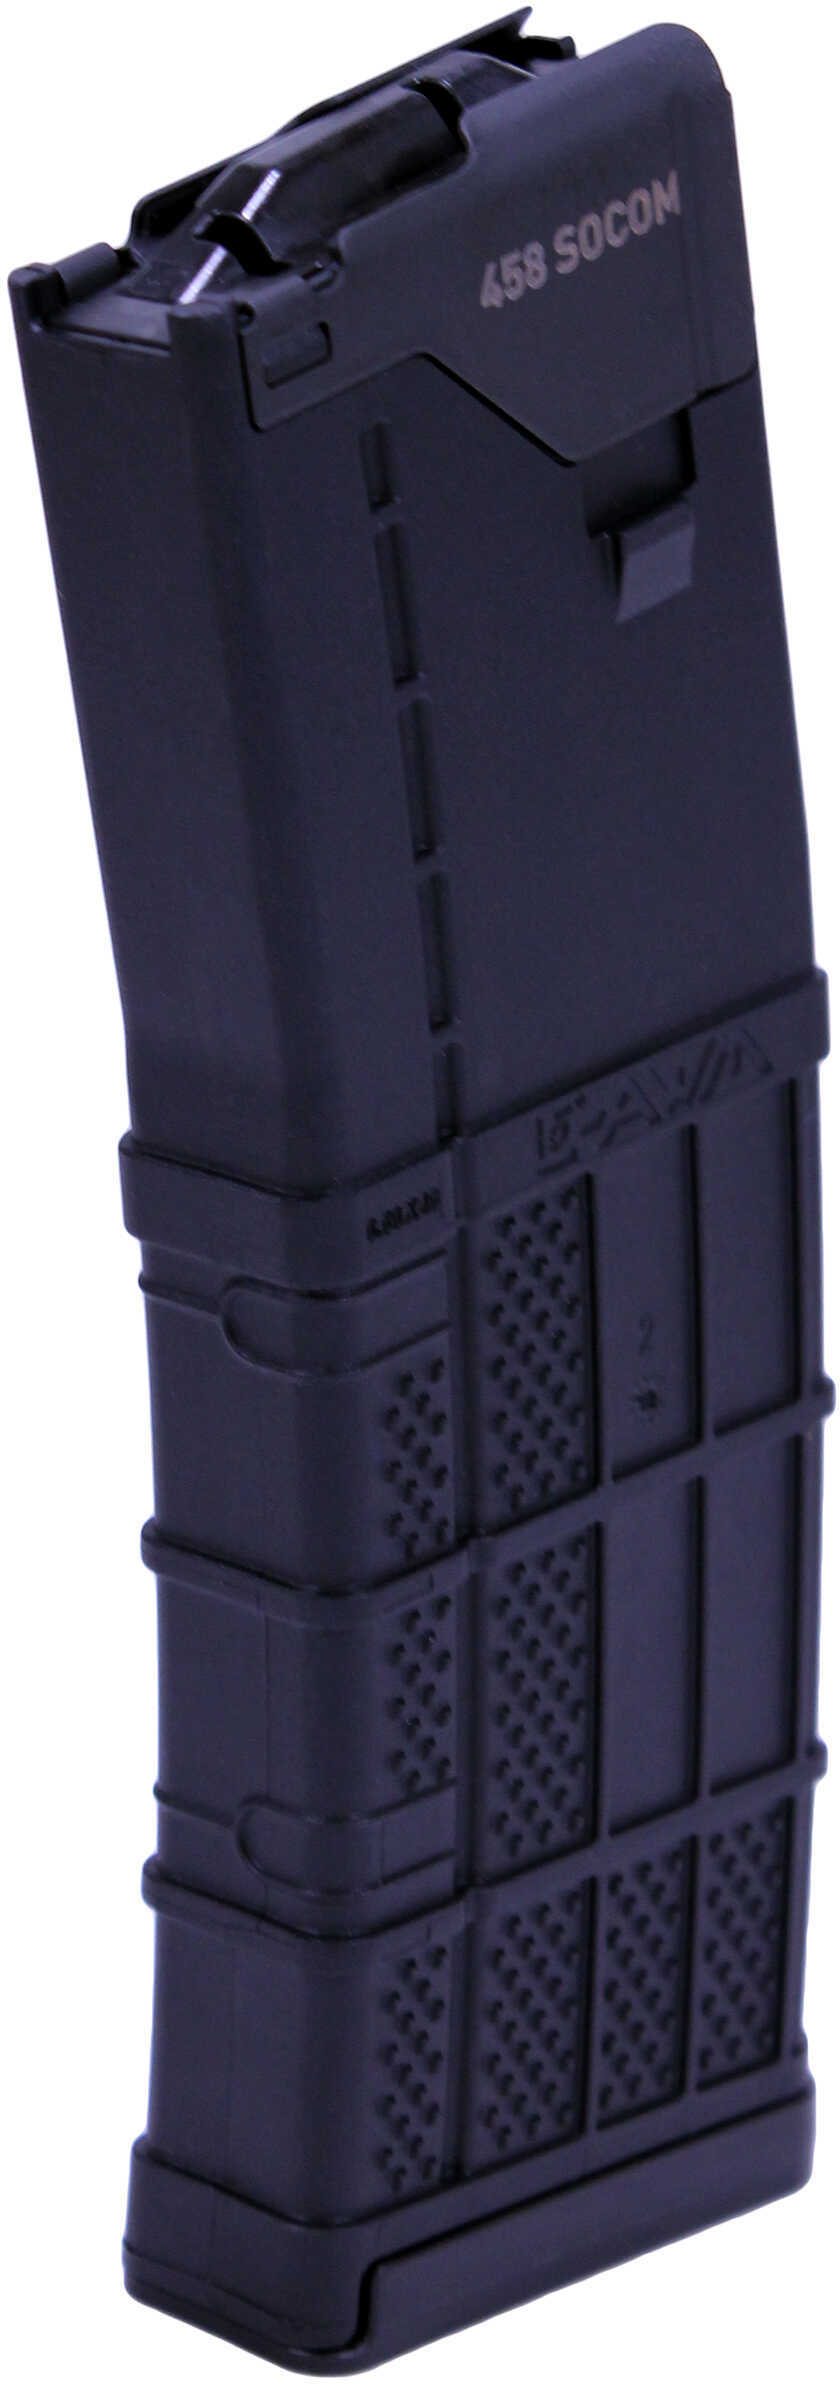 CMMG Magazine MKW-15 .458 SOCOM 30 Rounds Modified To 10 Rounds Hi-cap Md: 48AFC44